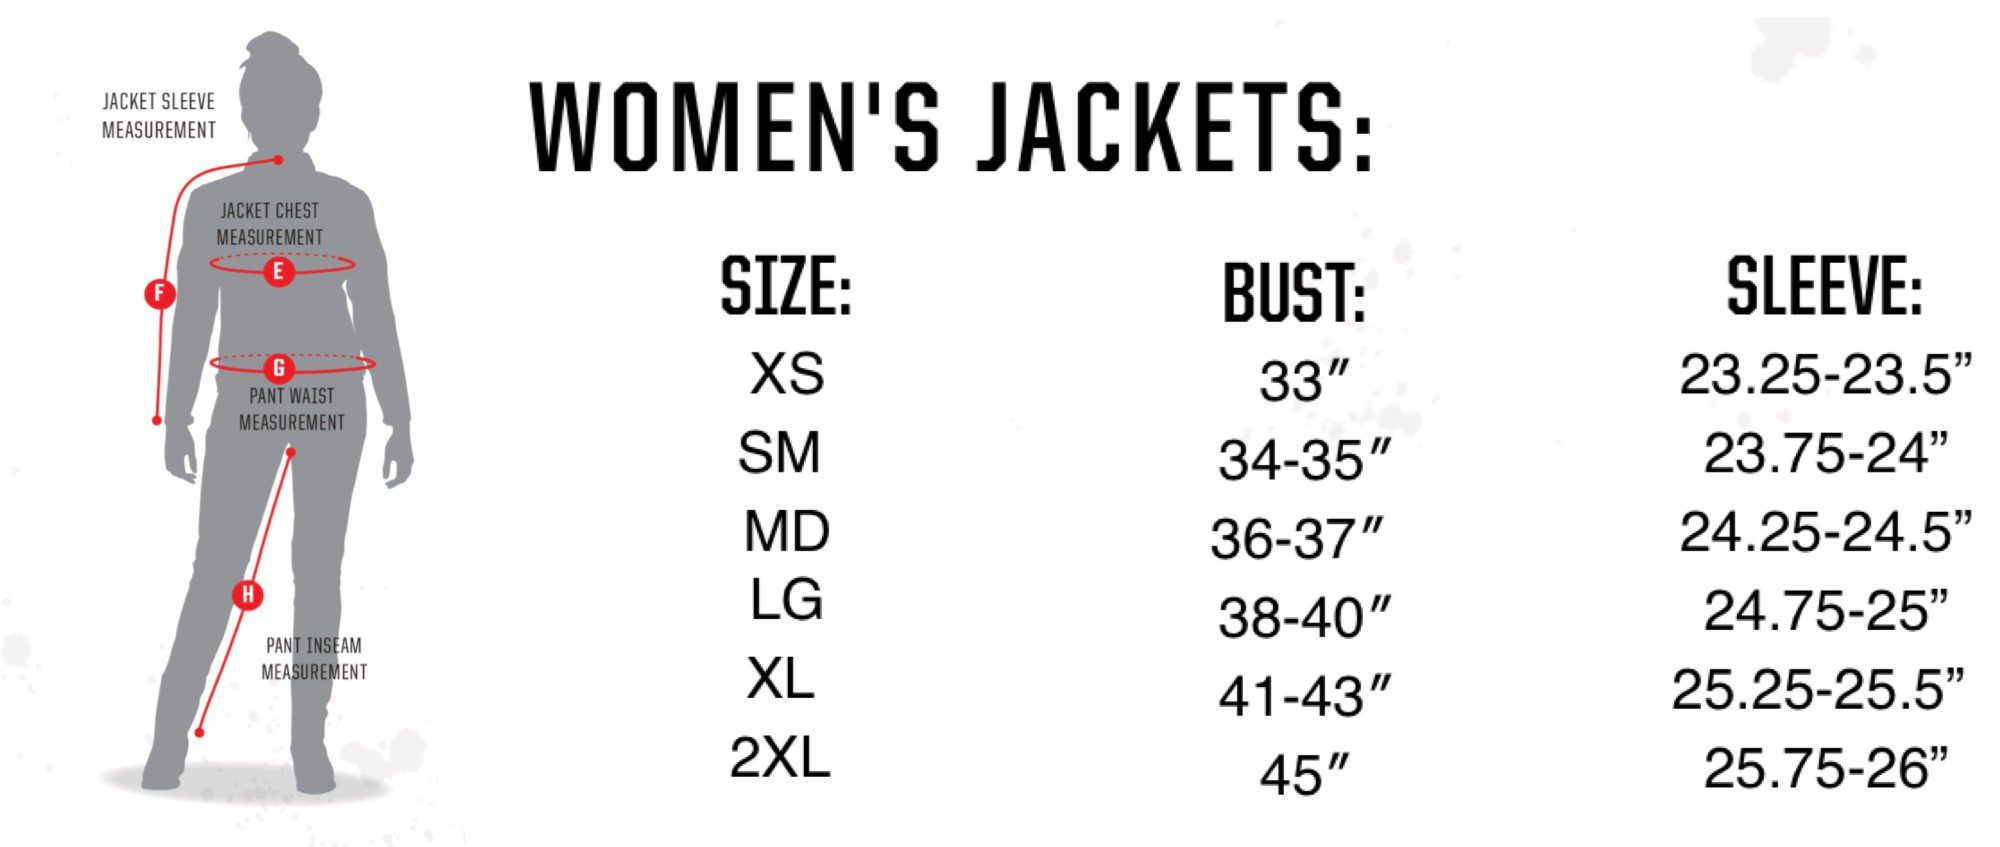 Women's sizing for the jacket